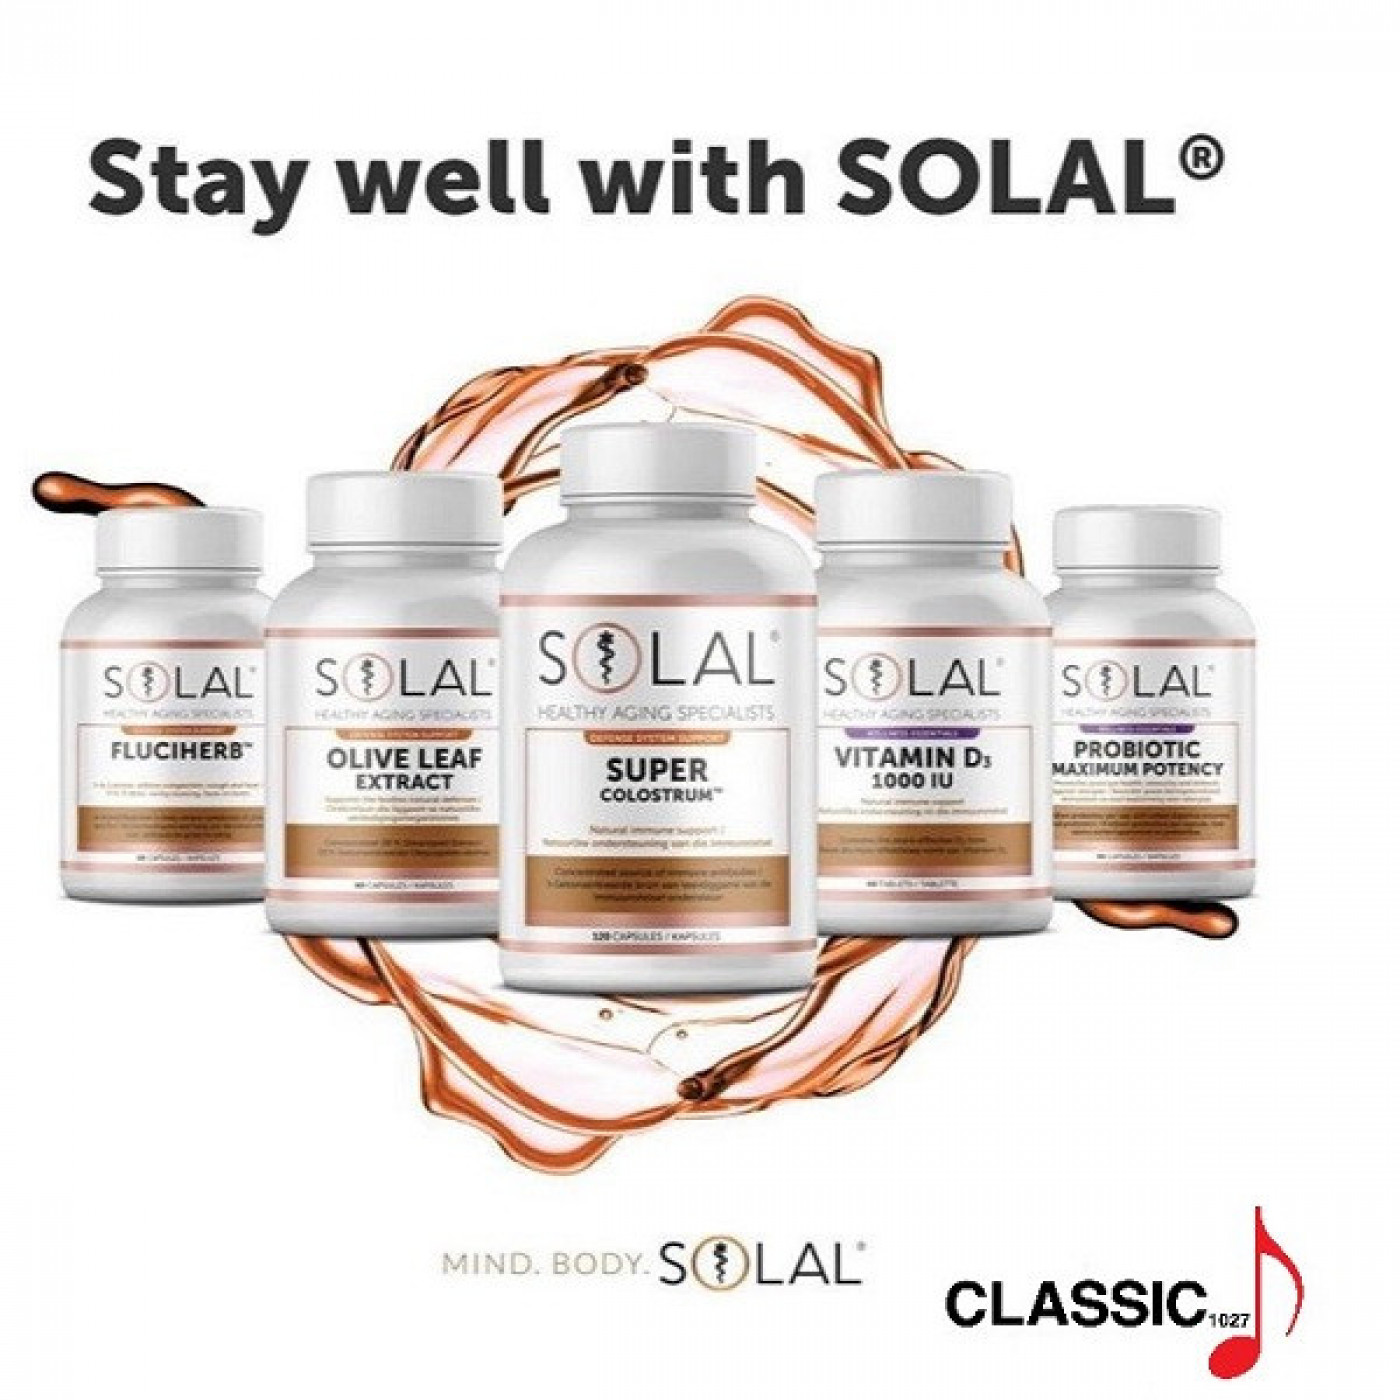 Stay Well with Solal - What to do if I have Symptoms